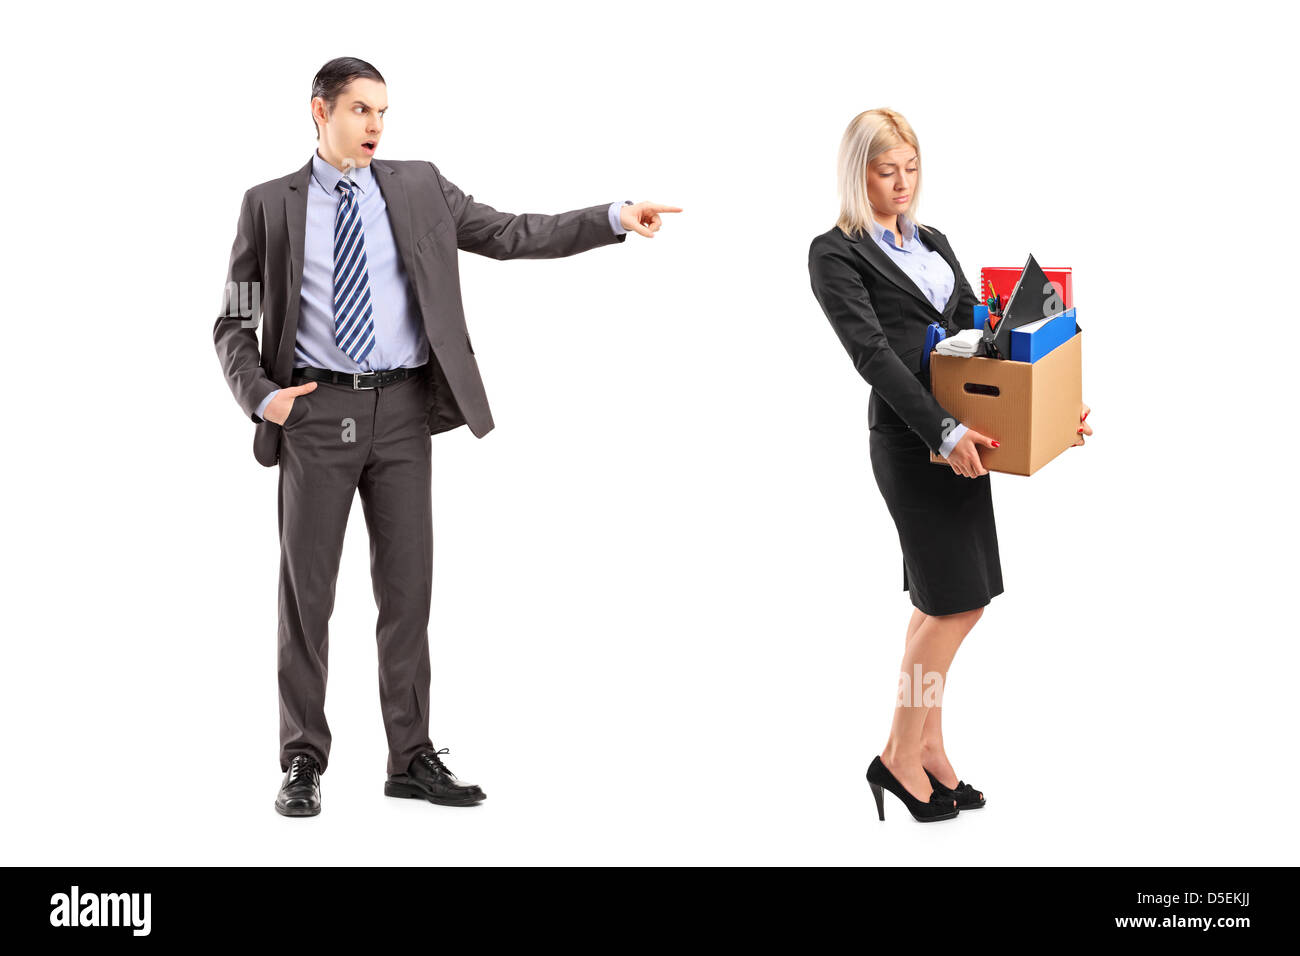 Full length portrait of an angry boss firing a woman with a box of her personal items isolated on white background Stock Photo